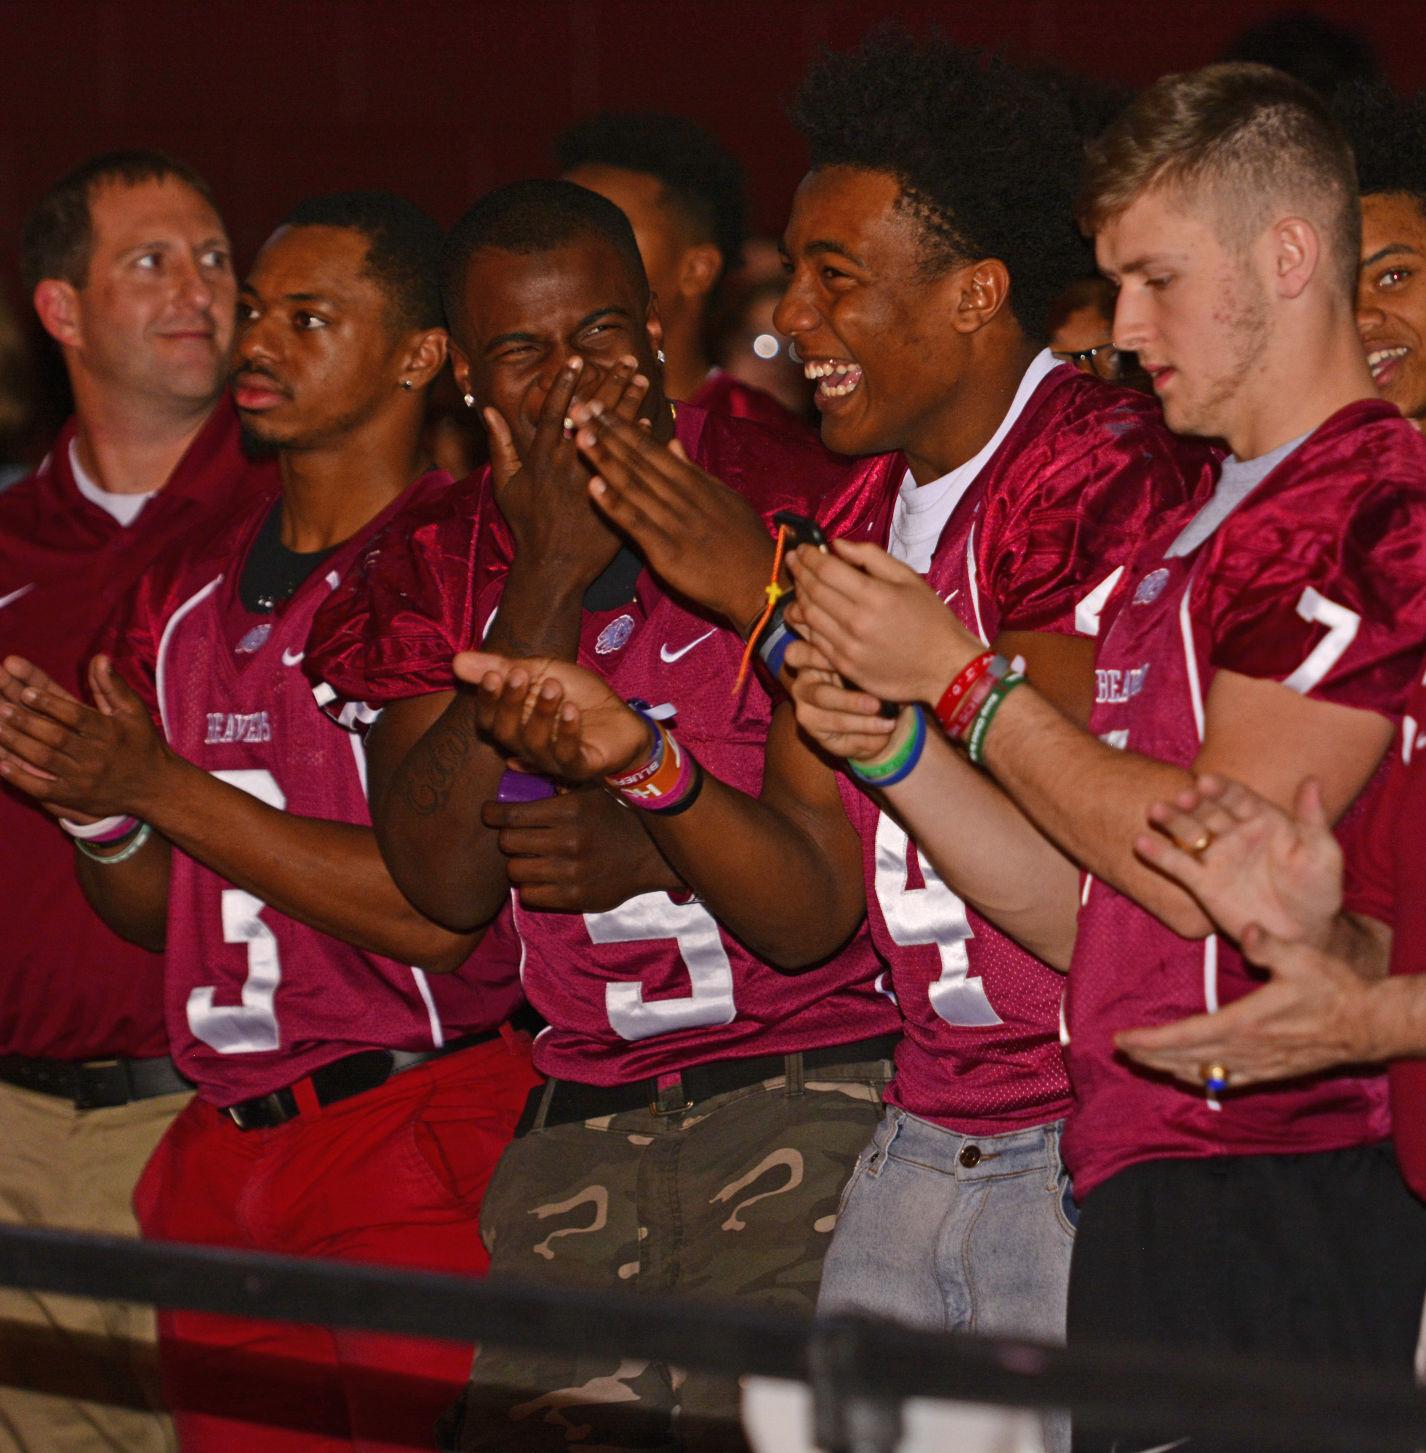 Hail to the champs! Students, community leaders join in celebration of